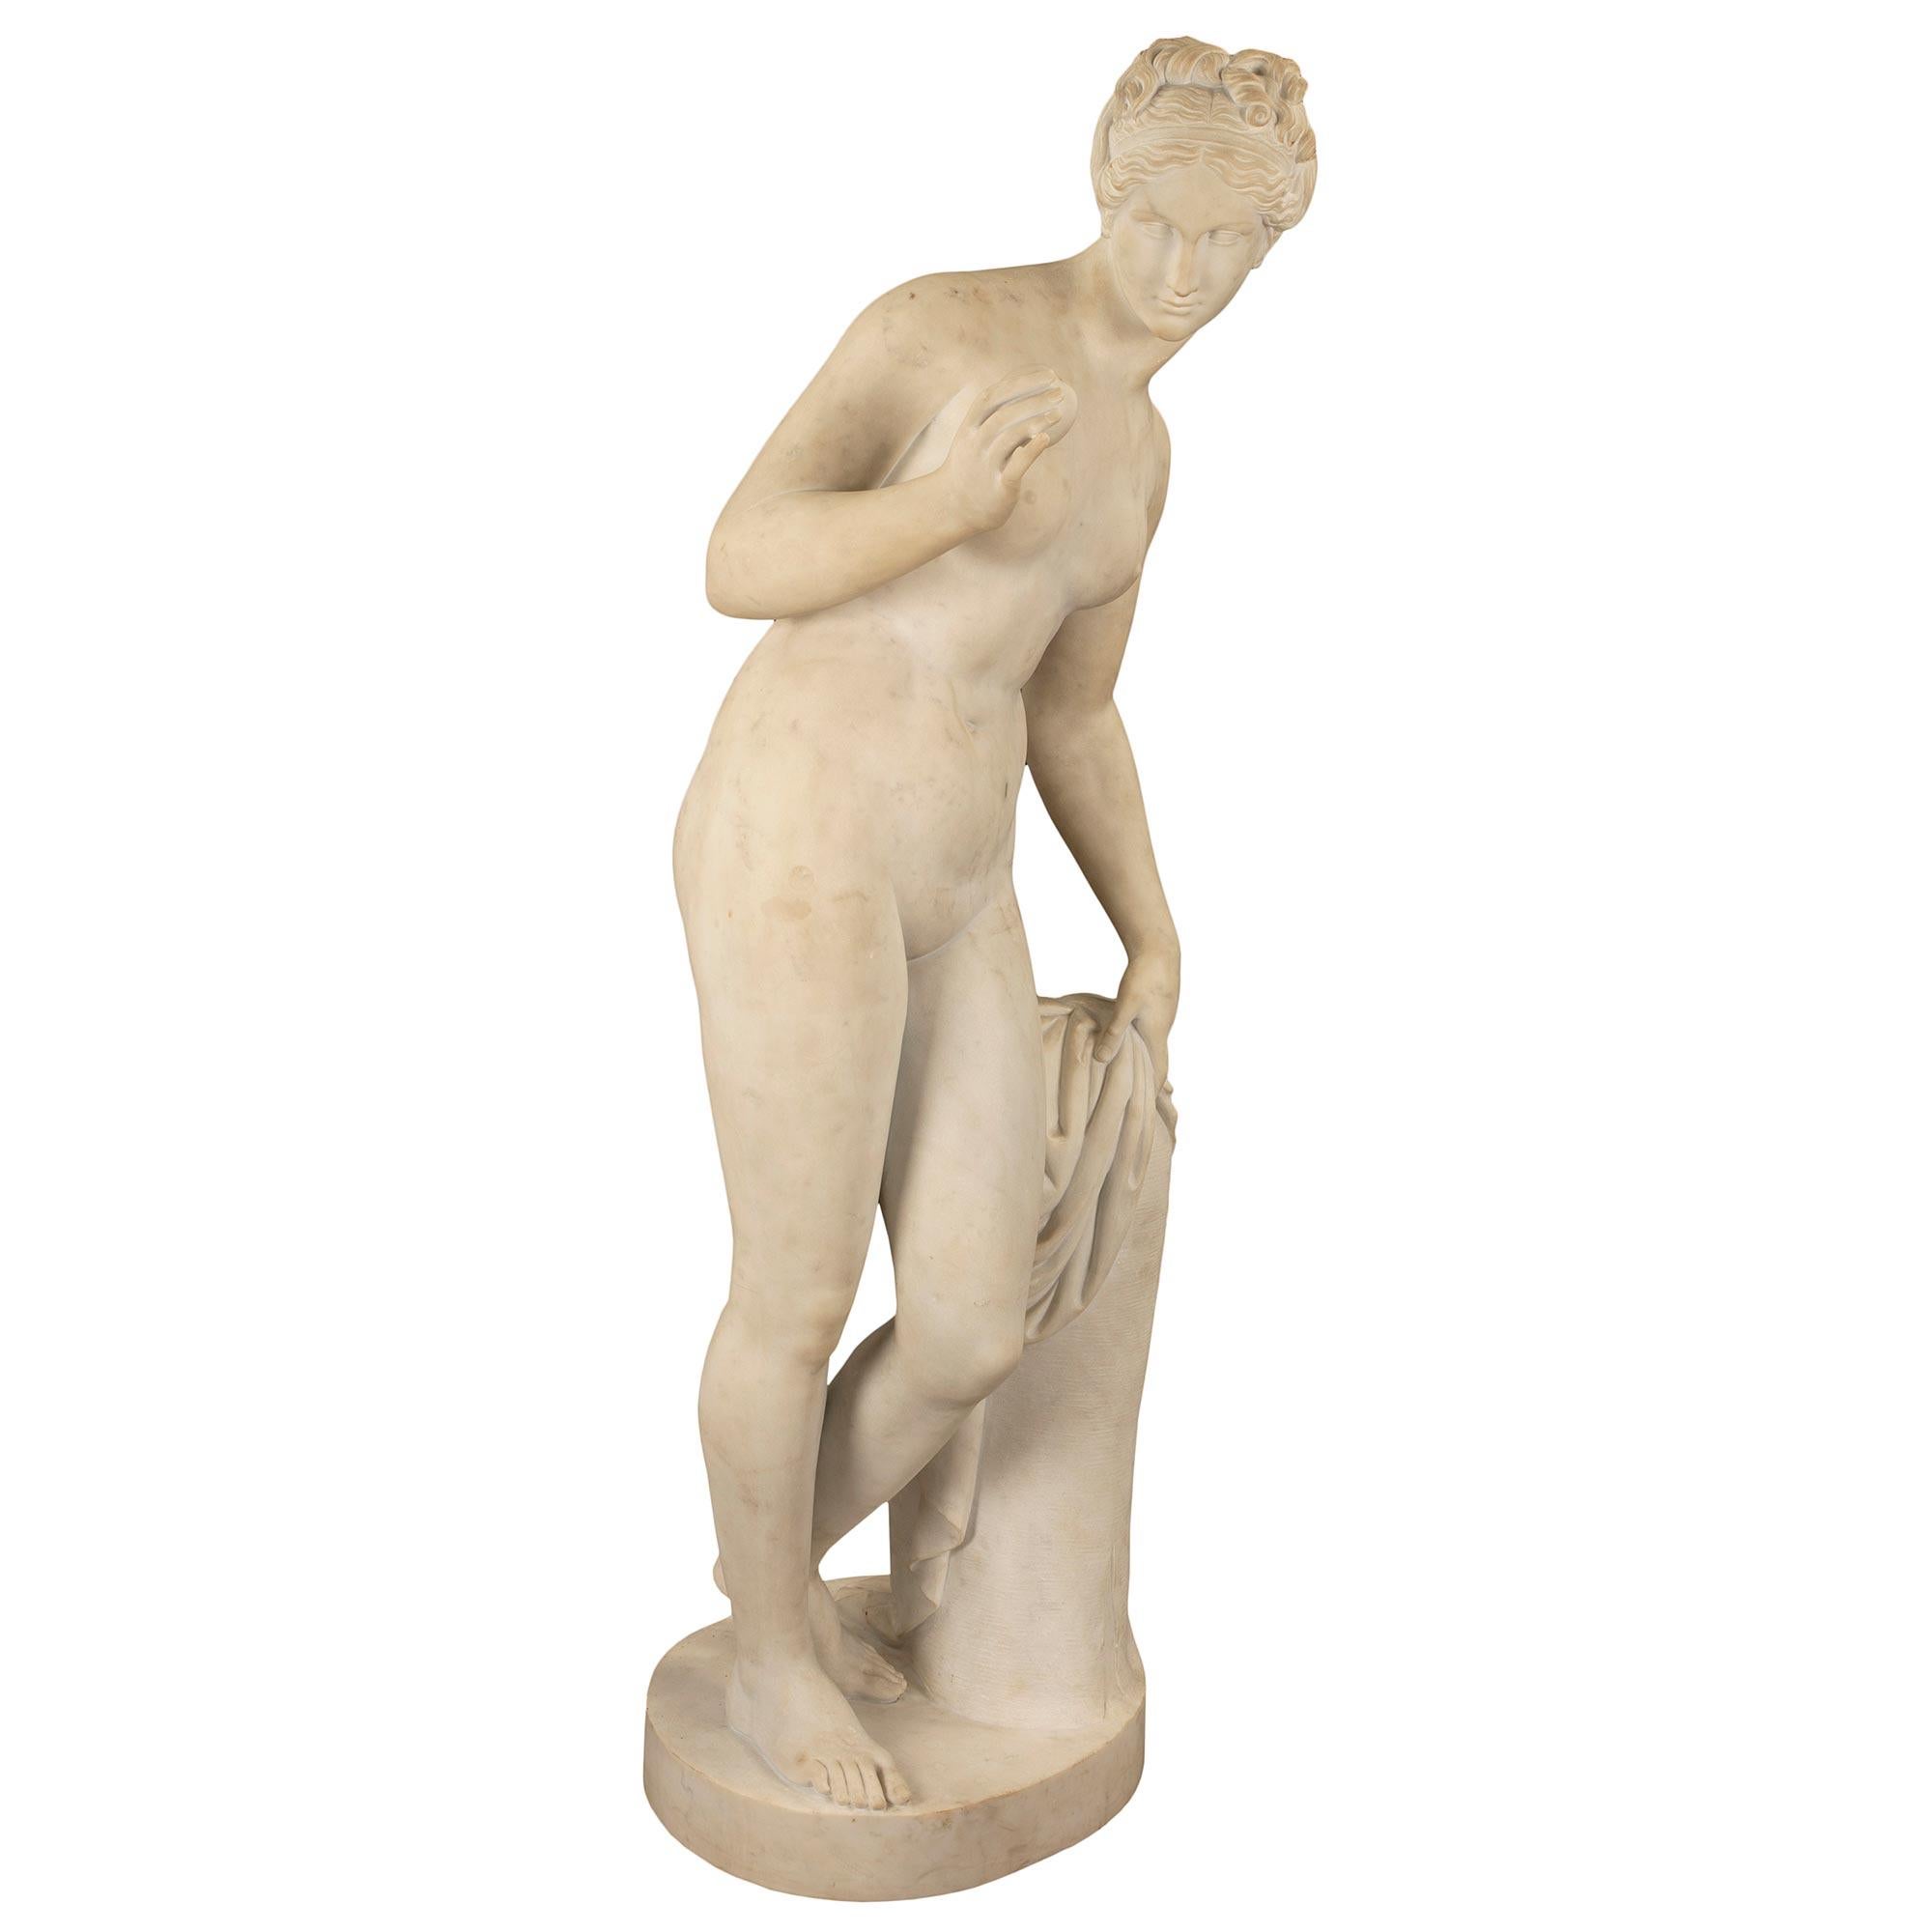 An exquisite and high quality Italian mid 19th century white Carrara marble statue of Venus. This almost life size statue, depicts the goddess leaning against a tree stump covered by a piece of cloth. She is gazing at an apple that she holds in her